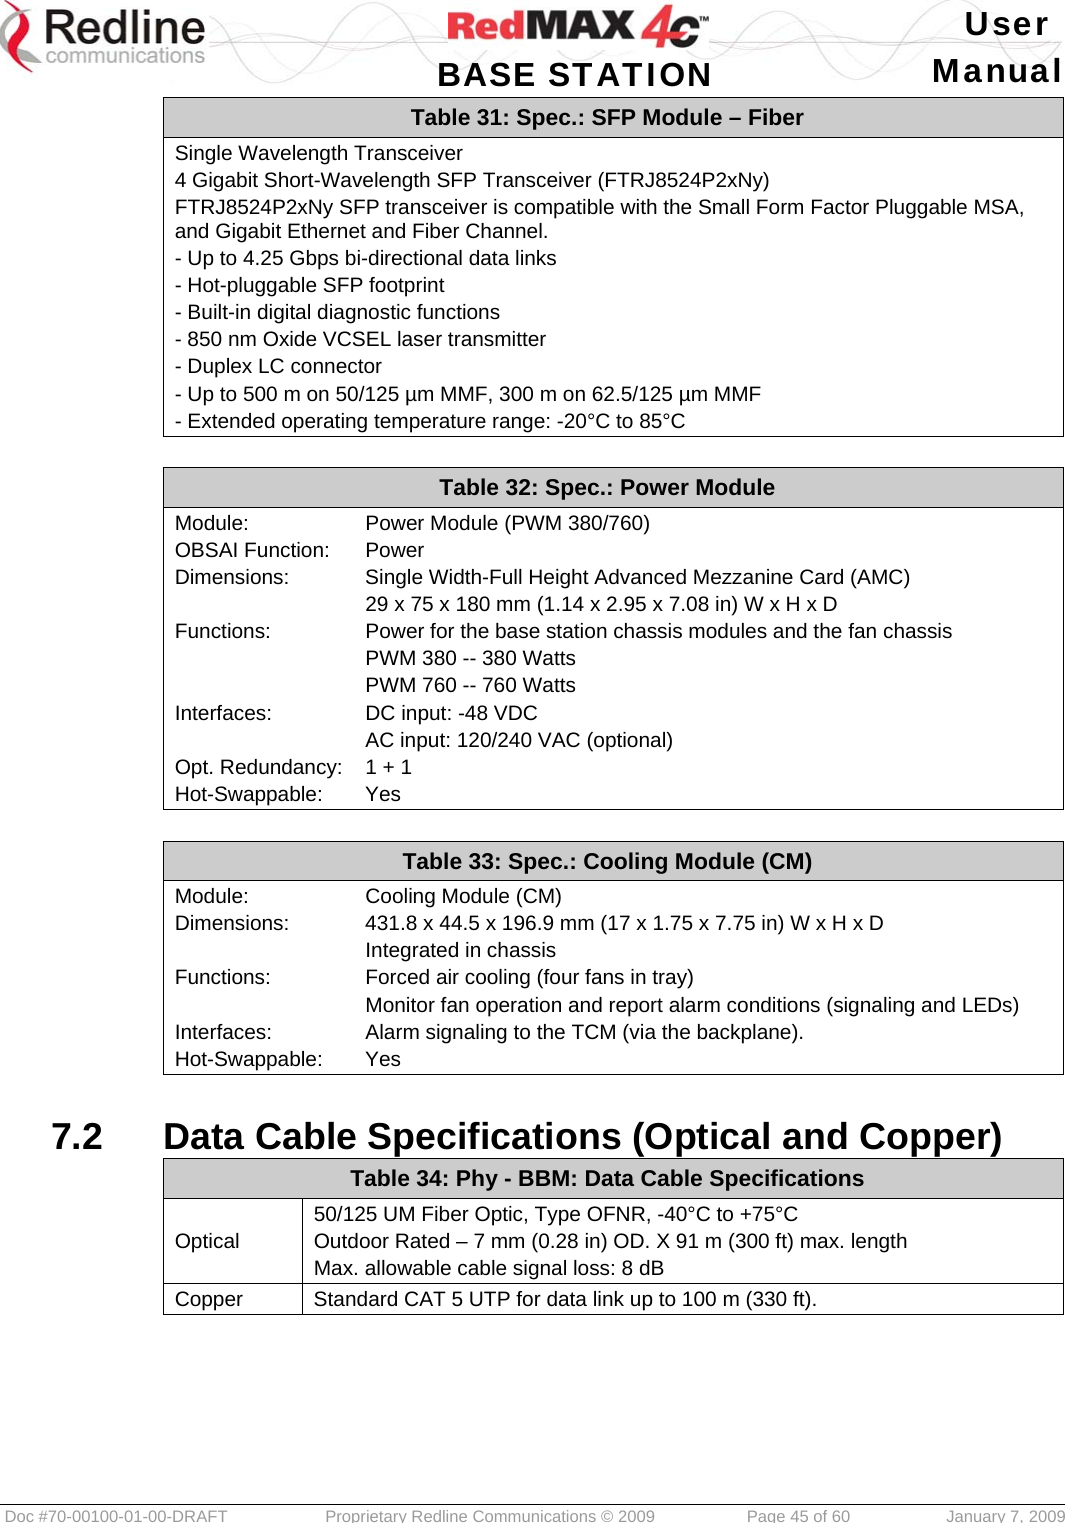   User  BASE STATION Manual  Doc #70-00100-01-00-DRAFT  Proprietary Redline Communications © 2009   Page 45 of 60  January 7, 2009 Table 31: Spec.: SFP Module – Fiber Single Wavelength Transceiver 4 Gigabit Short-Wavelength SFP Transceiver (FTRJ8524P2xNy) FTRJ8524P2xNy SFP transceiver is compatible with the Small Form Factor Pluggable MSA, and Gigabit Ethernet and Fiber Channel. - Up to 4.25 Gbps bi-directional data links  - Hot-pluggable SFP footprint  - Built-in digital diagnostic functions  - 850 nm Oxide VCSEL laser transmitter  - Duplex LC connector  - Up to 500 m on 50/125 µm MMF, 300 m on 62.5/125 µm MMF  - Extended operating temperature range: -20°C to 85°C  Table 32: Spec.: Power Module Module:  Power Module (PWM 380/760) OBSAI Function:  Power Dimensions:  Single Width-Full Height Advanced Mezzanine Card (AMC)   29 x 75 x 180 mm (1.14 x 2.95 x 7.08 in) W x H x D  Functions:  Power for the base station chassis modules and the fan chassis   PWM 380 -- 380 Watts   PWM 760 -- 760 Watts Interfaces:  DC input: -48 VDC    AC input: 120/240 VAC (optional) Opt. Redundancy:  1 + 1 Hot-Swappable: Yes  Table 33: Spec.: Cooling Module (CM) Module:  Cooling Module (CM) Dimensions:  431.8 x 44.5 x 196.9 mm (17 x 1.75 x 7.75 in) W x H x D  Integrated in chassis Functions:  Forced air cooling (four fans in tray)   Monitor fan operation and report alarm conditions (signaling and LEDs) Interfaces:  Alarm signaling to the TCM (via the backplane). Hot-Swappable: Yes  7.2  Data Cable Specifications (Optical and Copper) Table 34: Phy - BBM: Data Cable Specifications Optical 50/125 UM Fiber Optic, Type OFNR, -40°C to +75°C Outdoor Rated – 7 mm (0.28 in) OD. X 91 m (300 ft) max. length Max. allowable cable signal loss: 8 dB Copper  Standard CAT 5 UTP for data link up to 100 m (330 ft).  